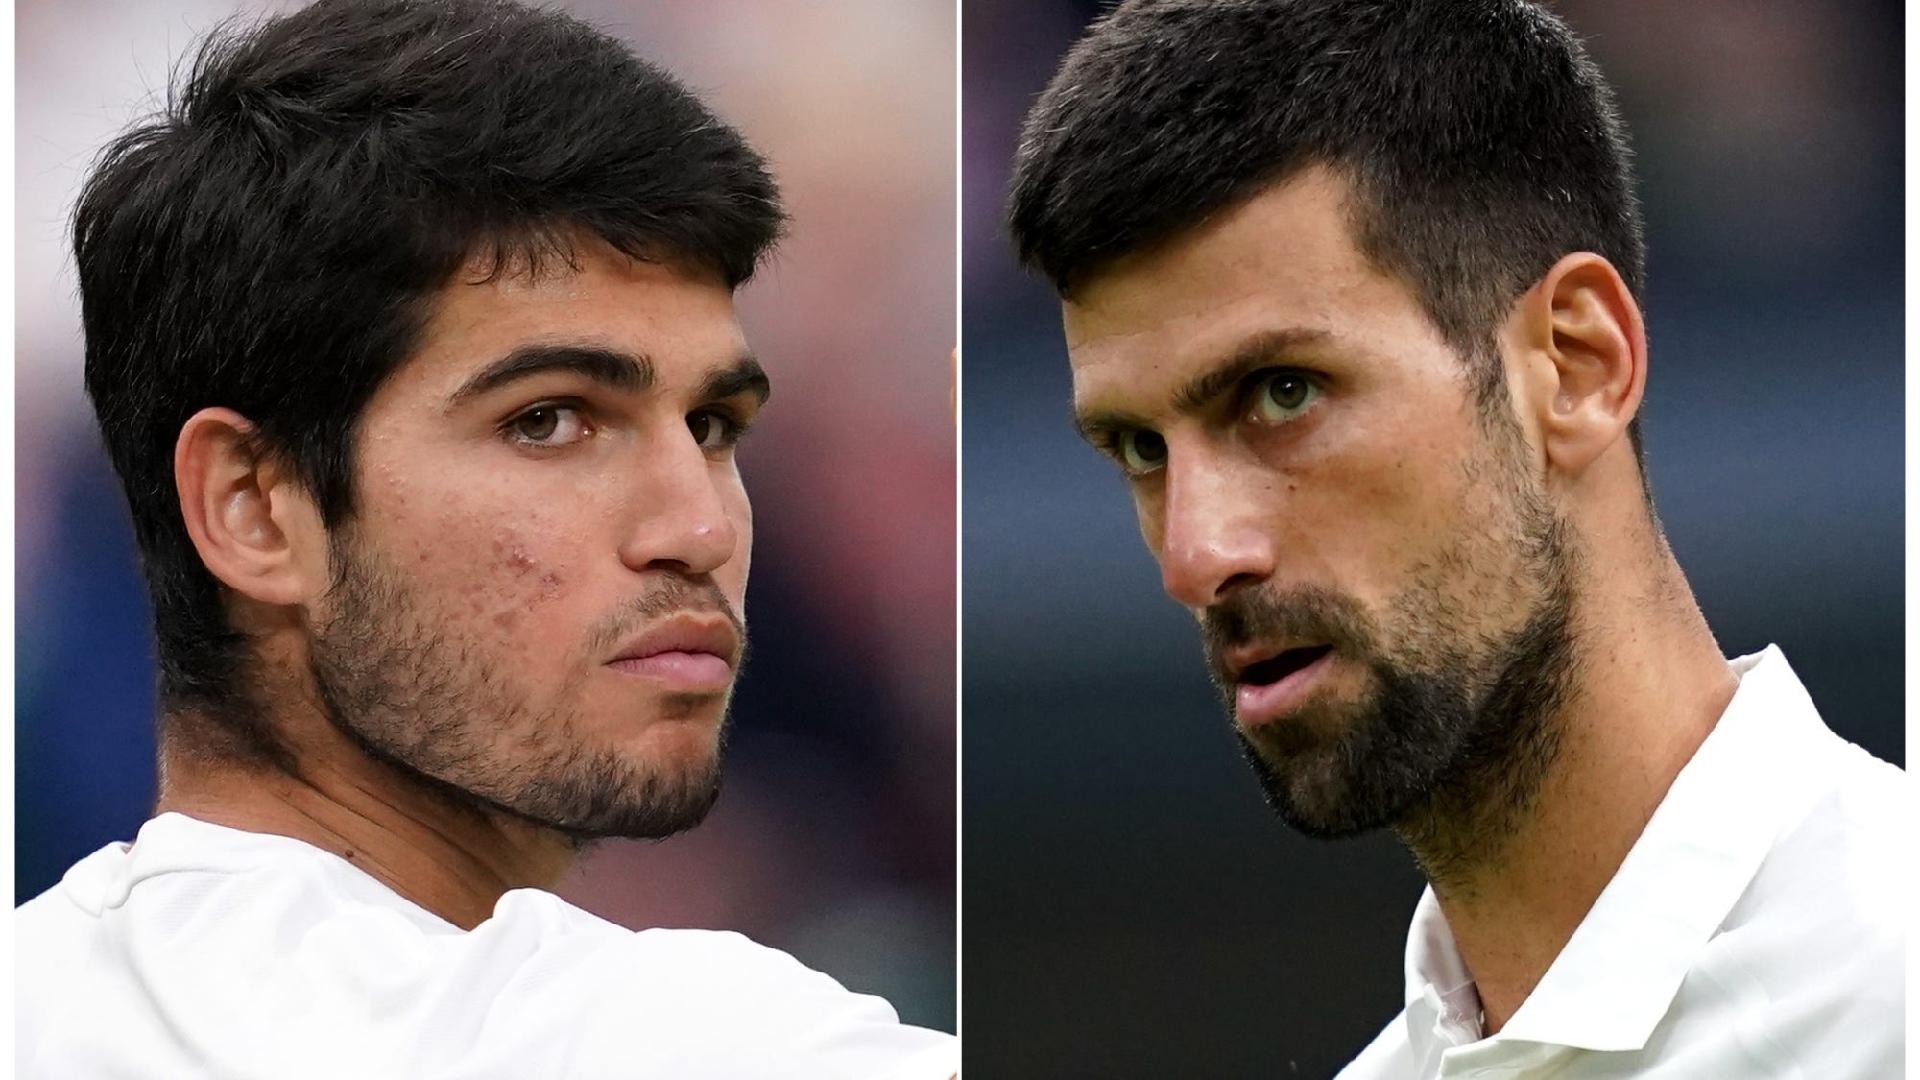 Carlos Alcaraz out to end Novak Djokovic’s reign in Wimbledon final for the ages